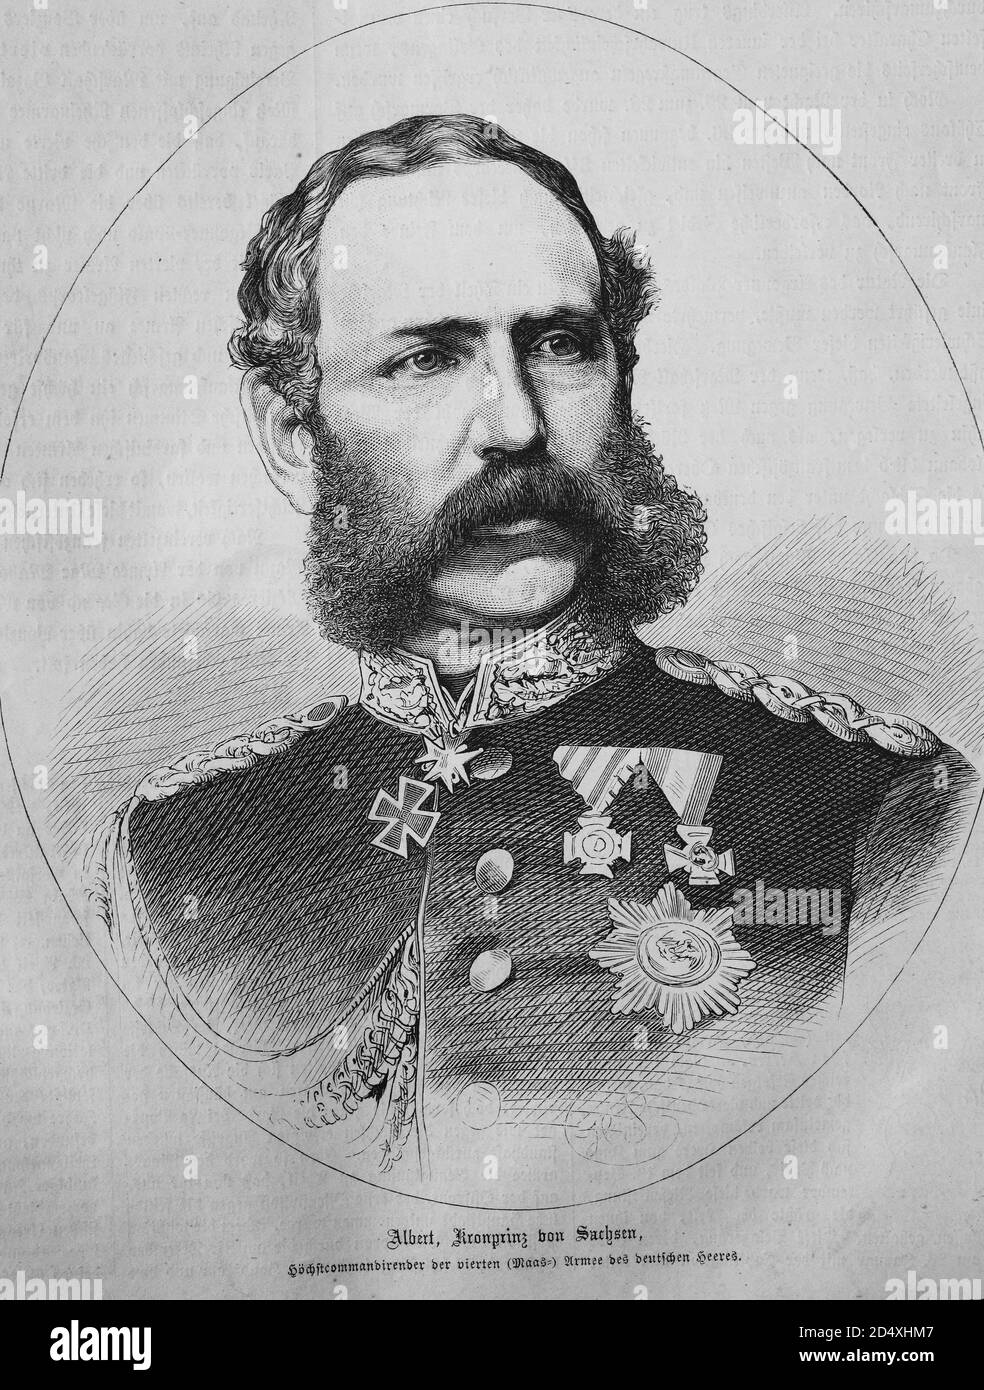 Albert of Saxony, crown prince of Saxony, illustrated war history, German - French war 1870-1871 Stock Photo